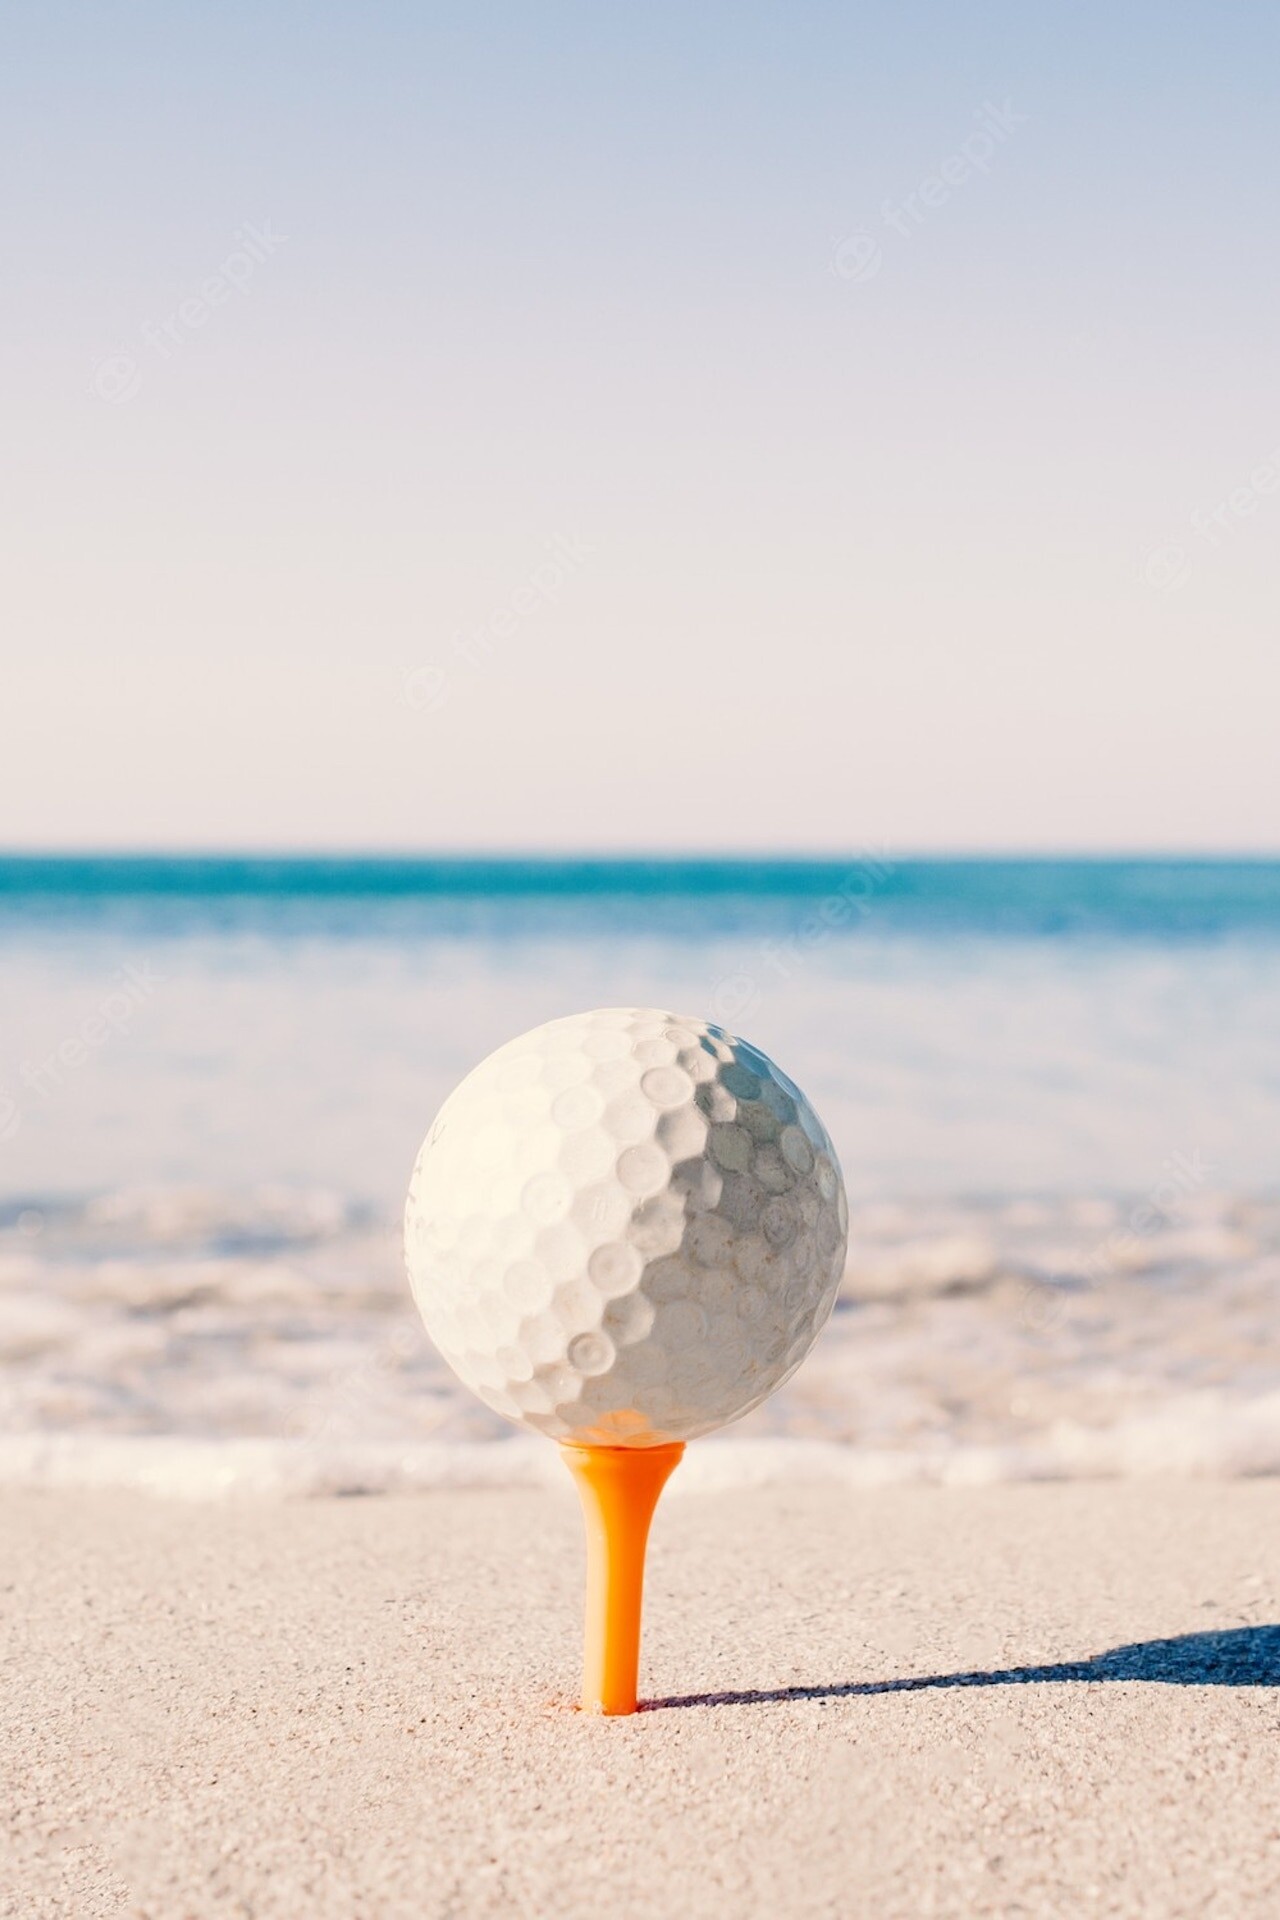 Beach Golf: The main rule of the game states that people and things constitute natural obstacles on the path. 1280x1920 HD Wallpaper.